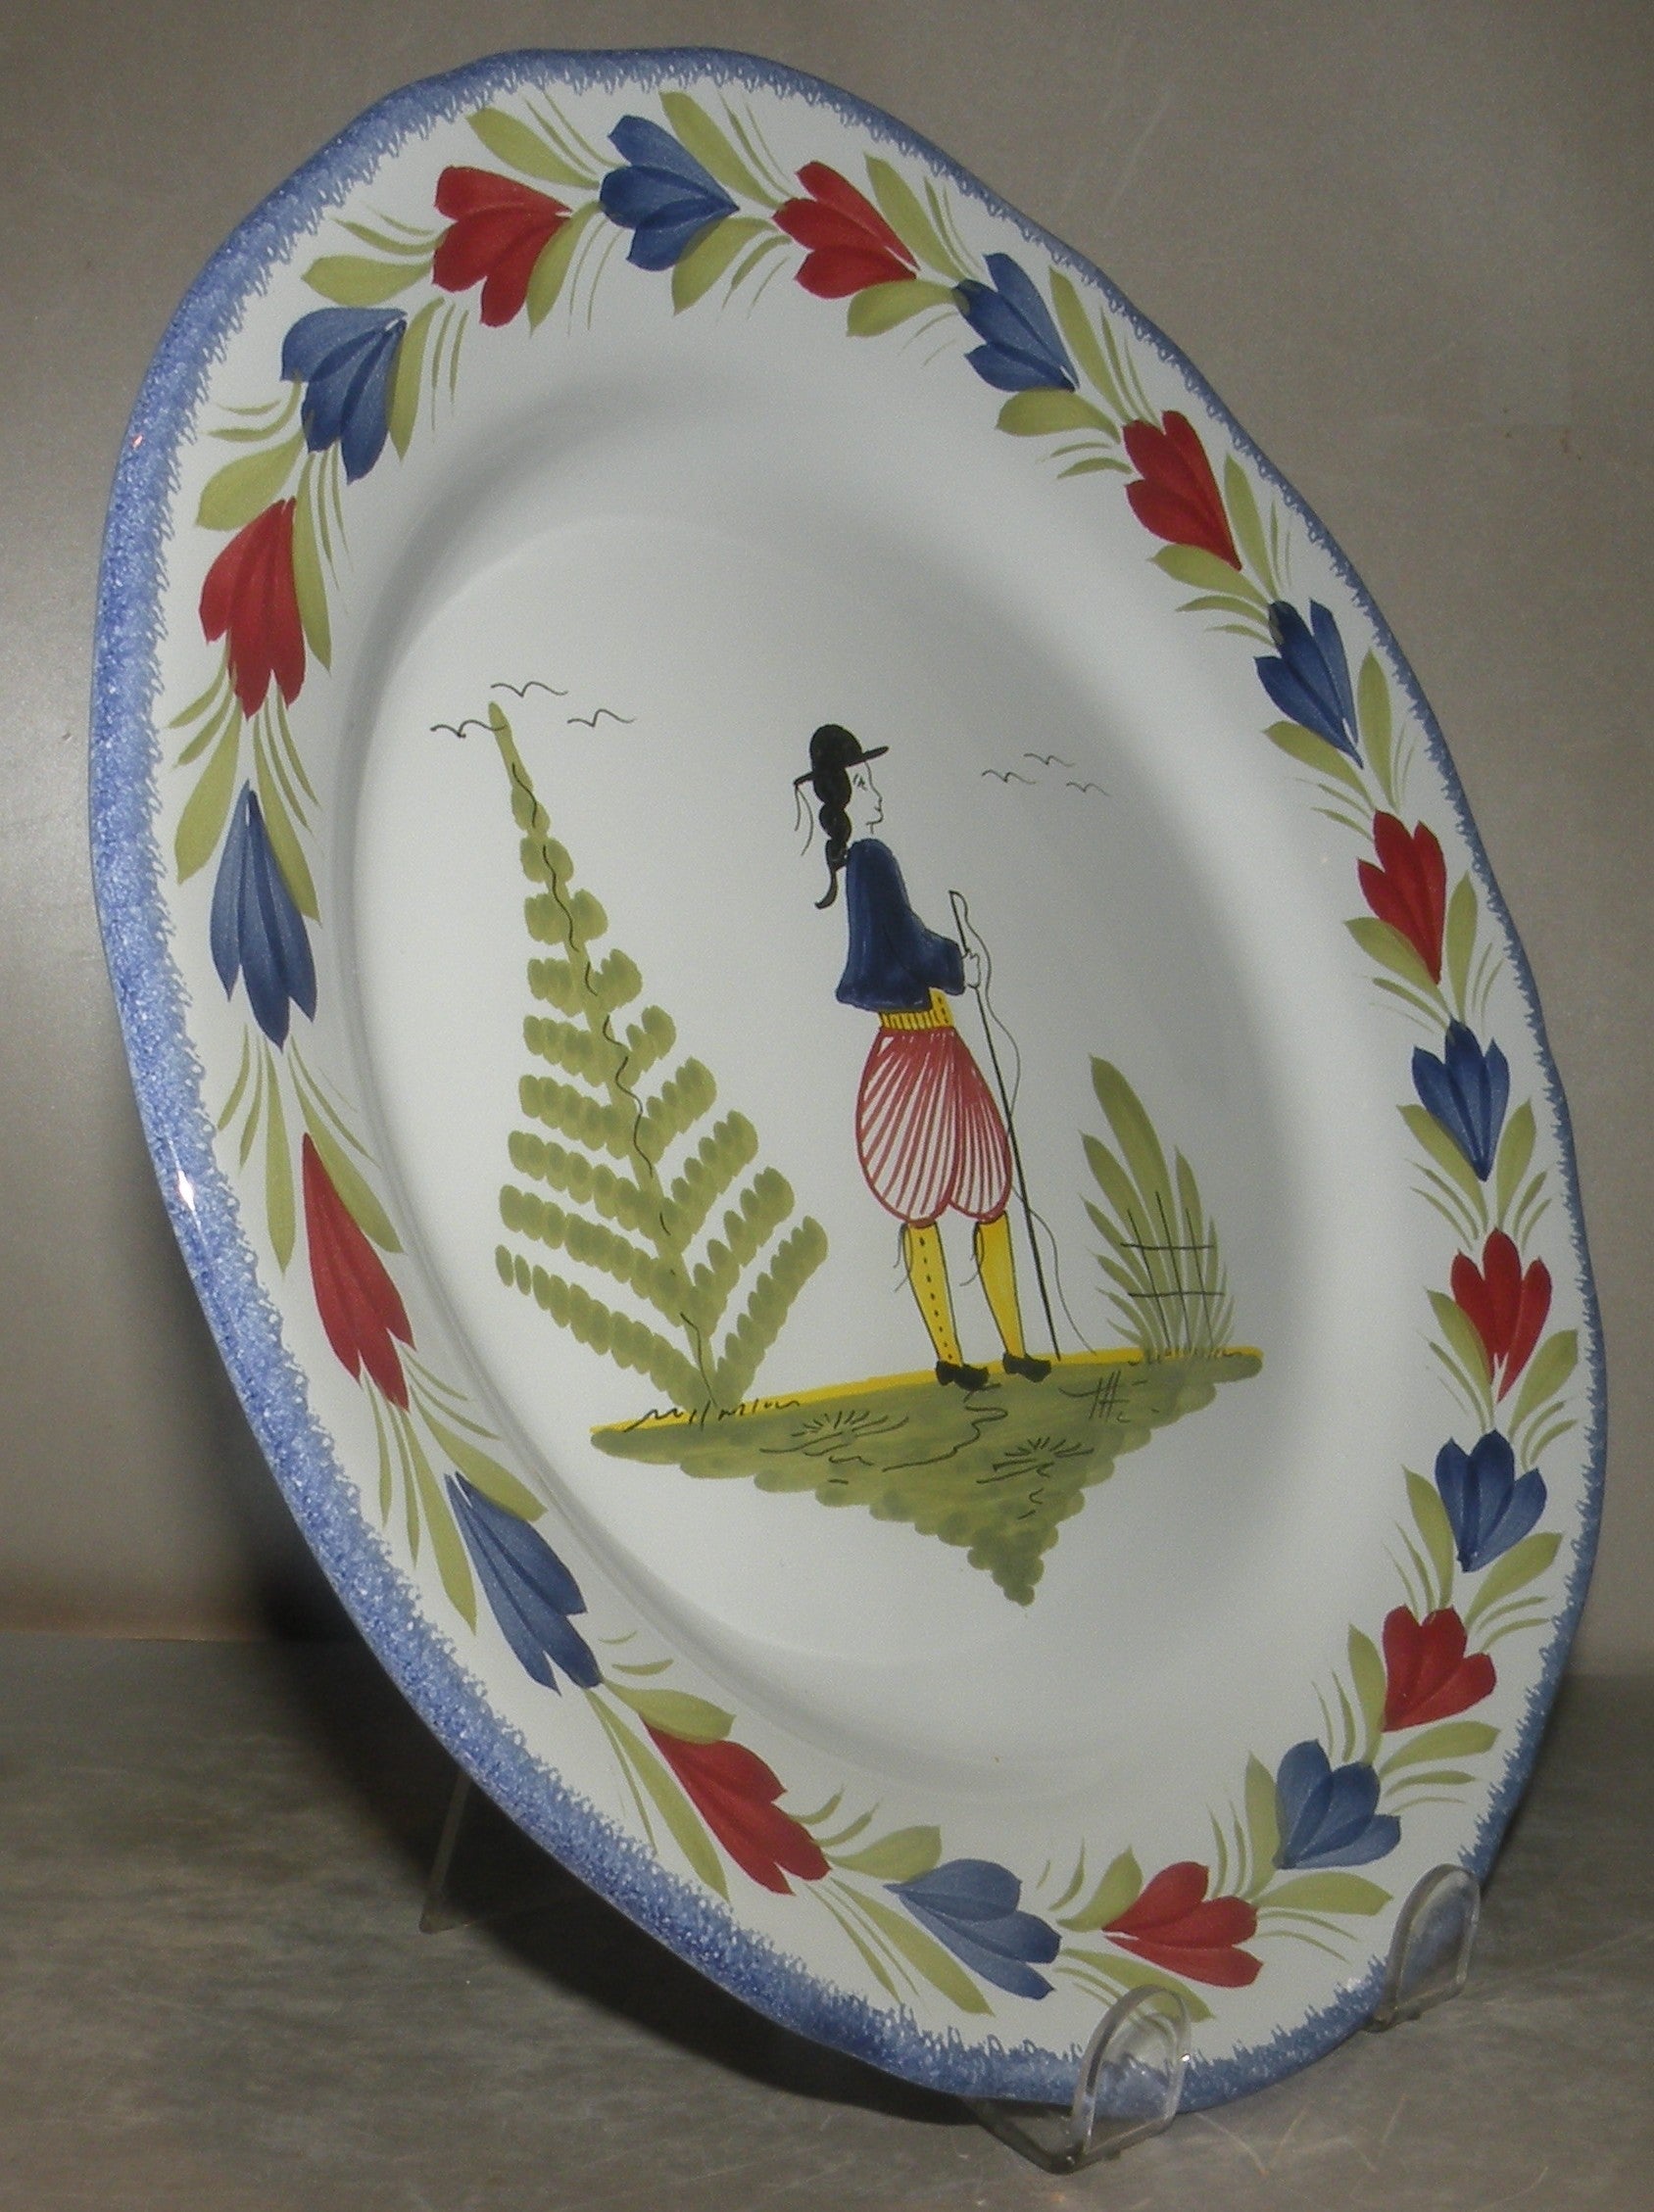 Scalopped Lunch with Man ( dessert ) Plate  Mistral Blue